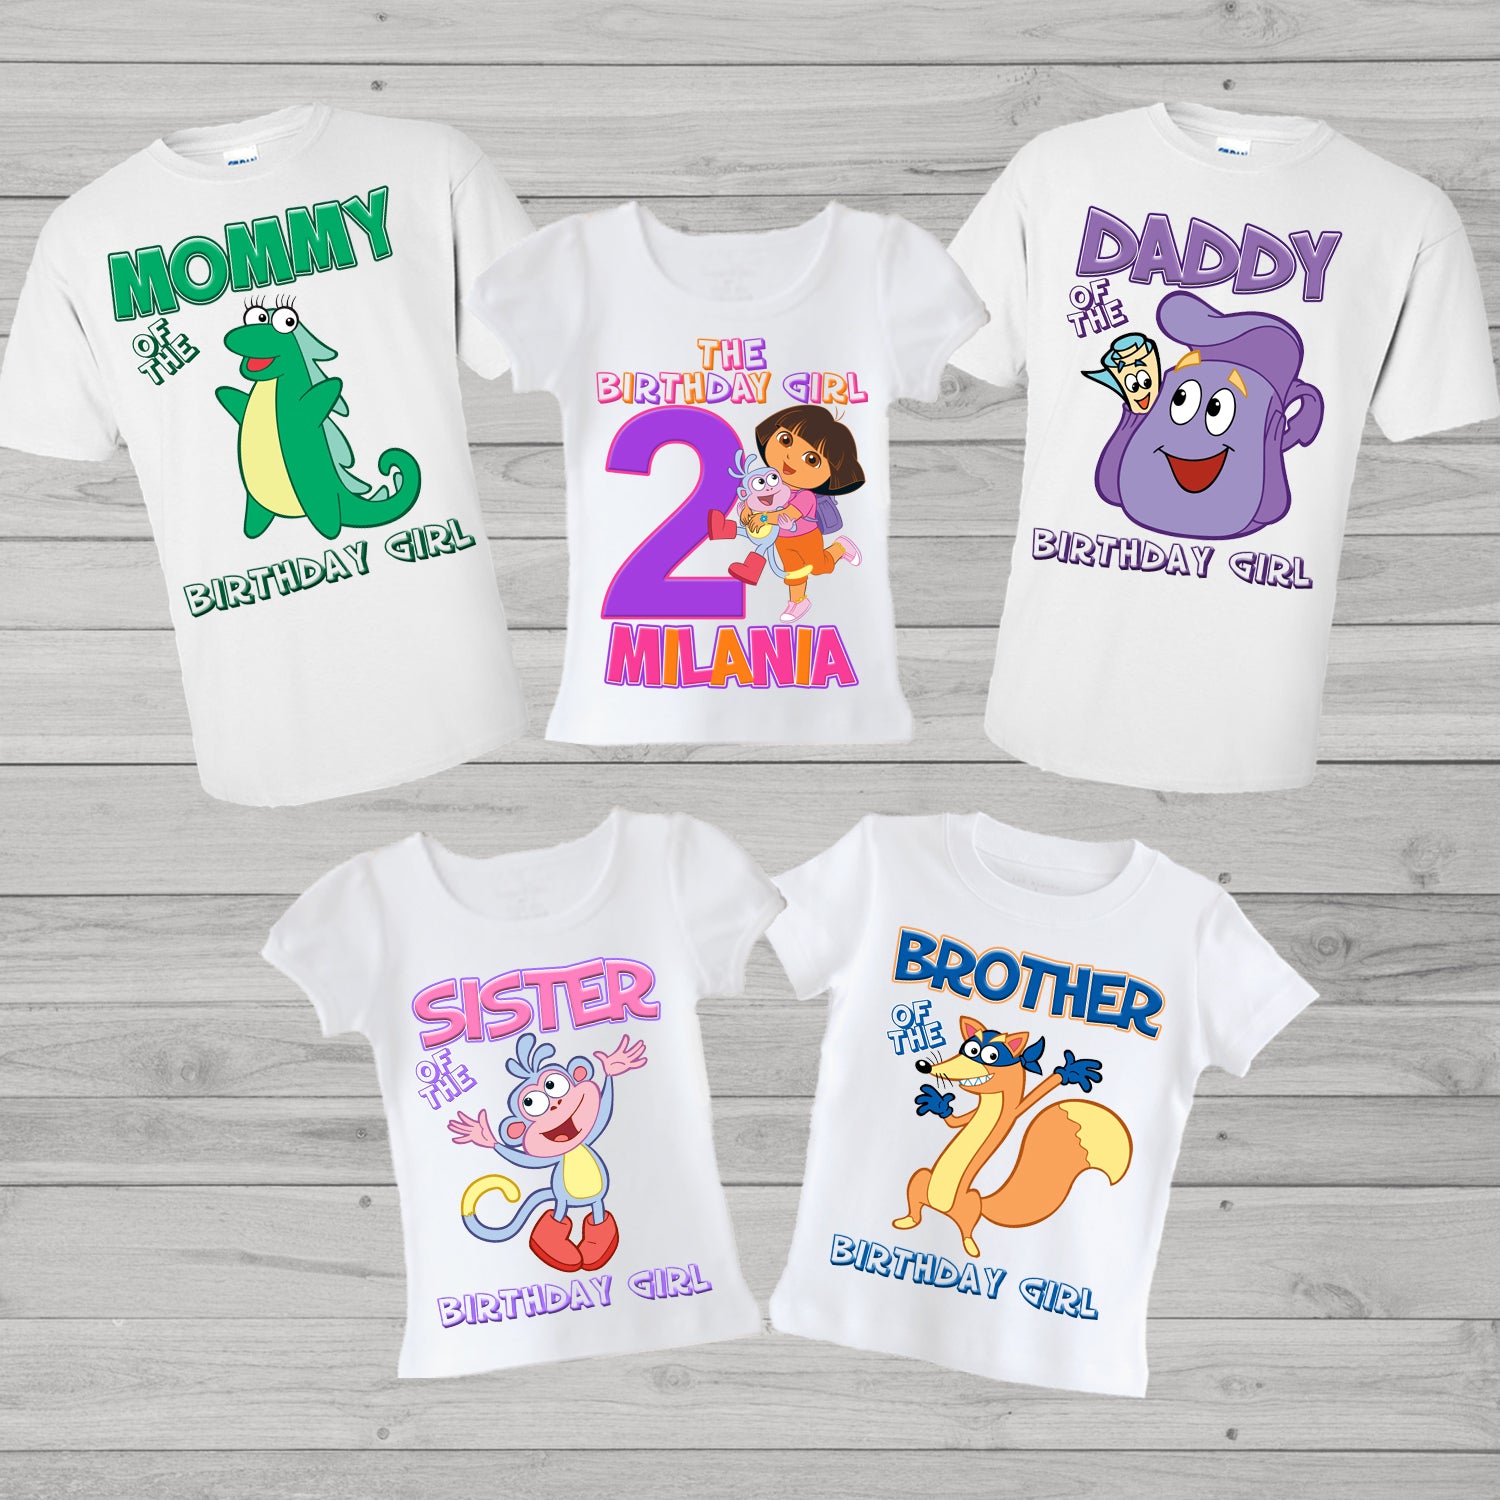 20th Birthday Shirts for Her, 20th Birthday Shirt, Funny 20th Birthday Gifts, Gifts for Women Turning 20